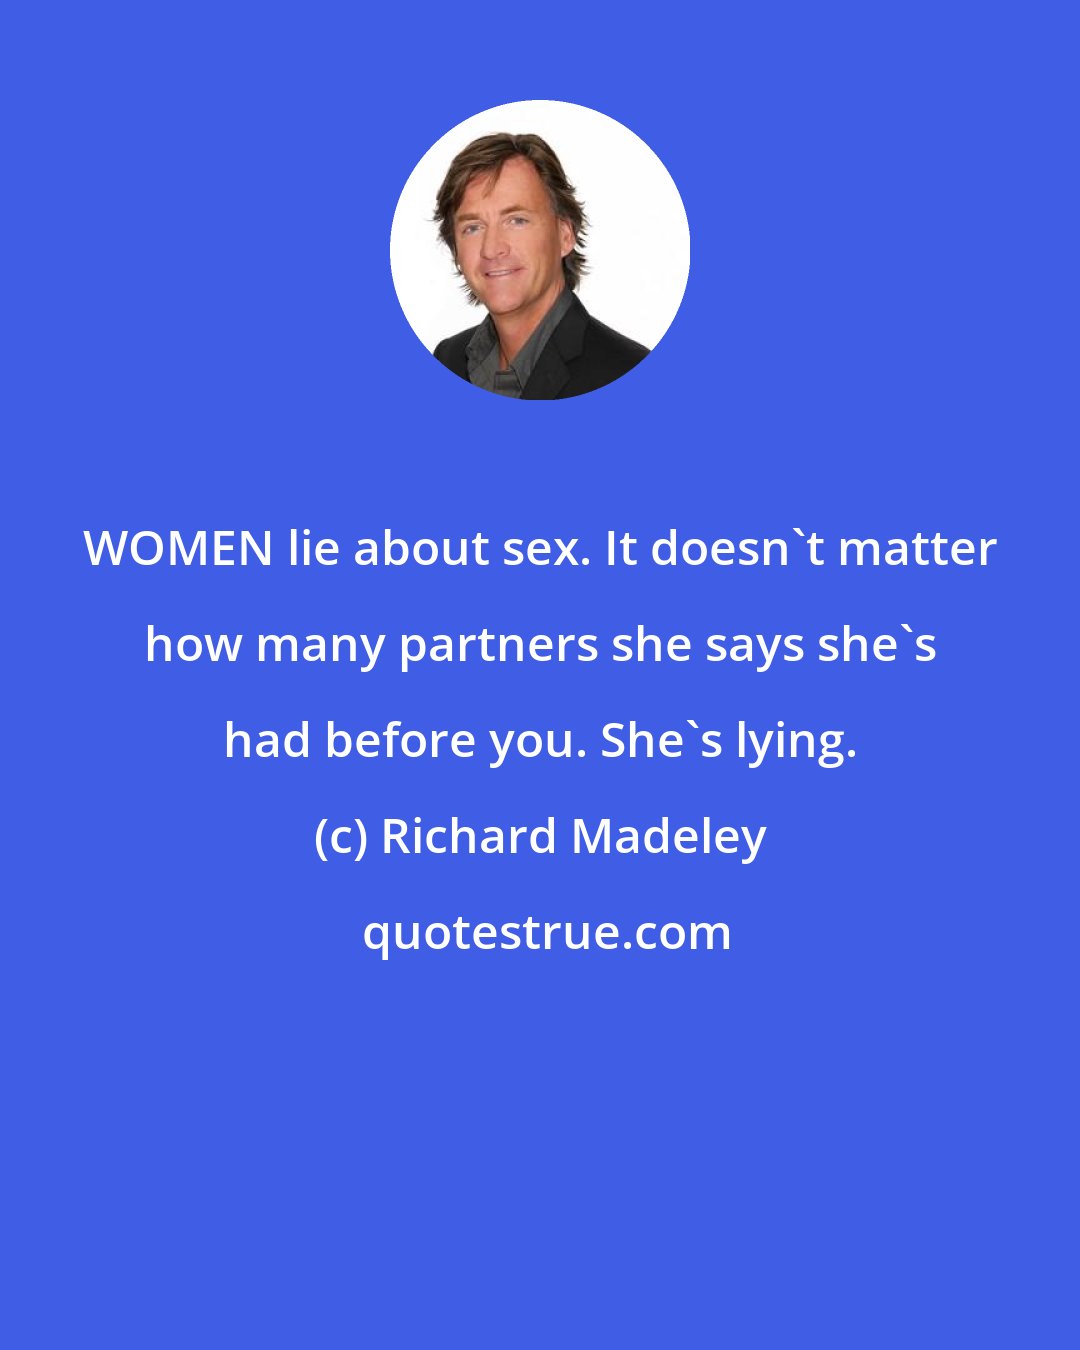 Richard Madeley: WOMEN lie about sex. It doesn't matter how many partners she says she's had before you. She's lying.